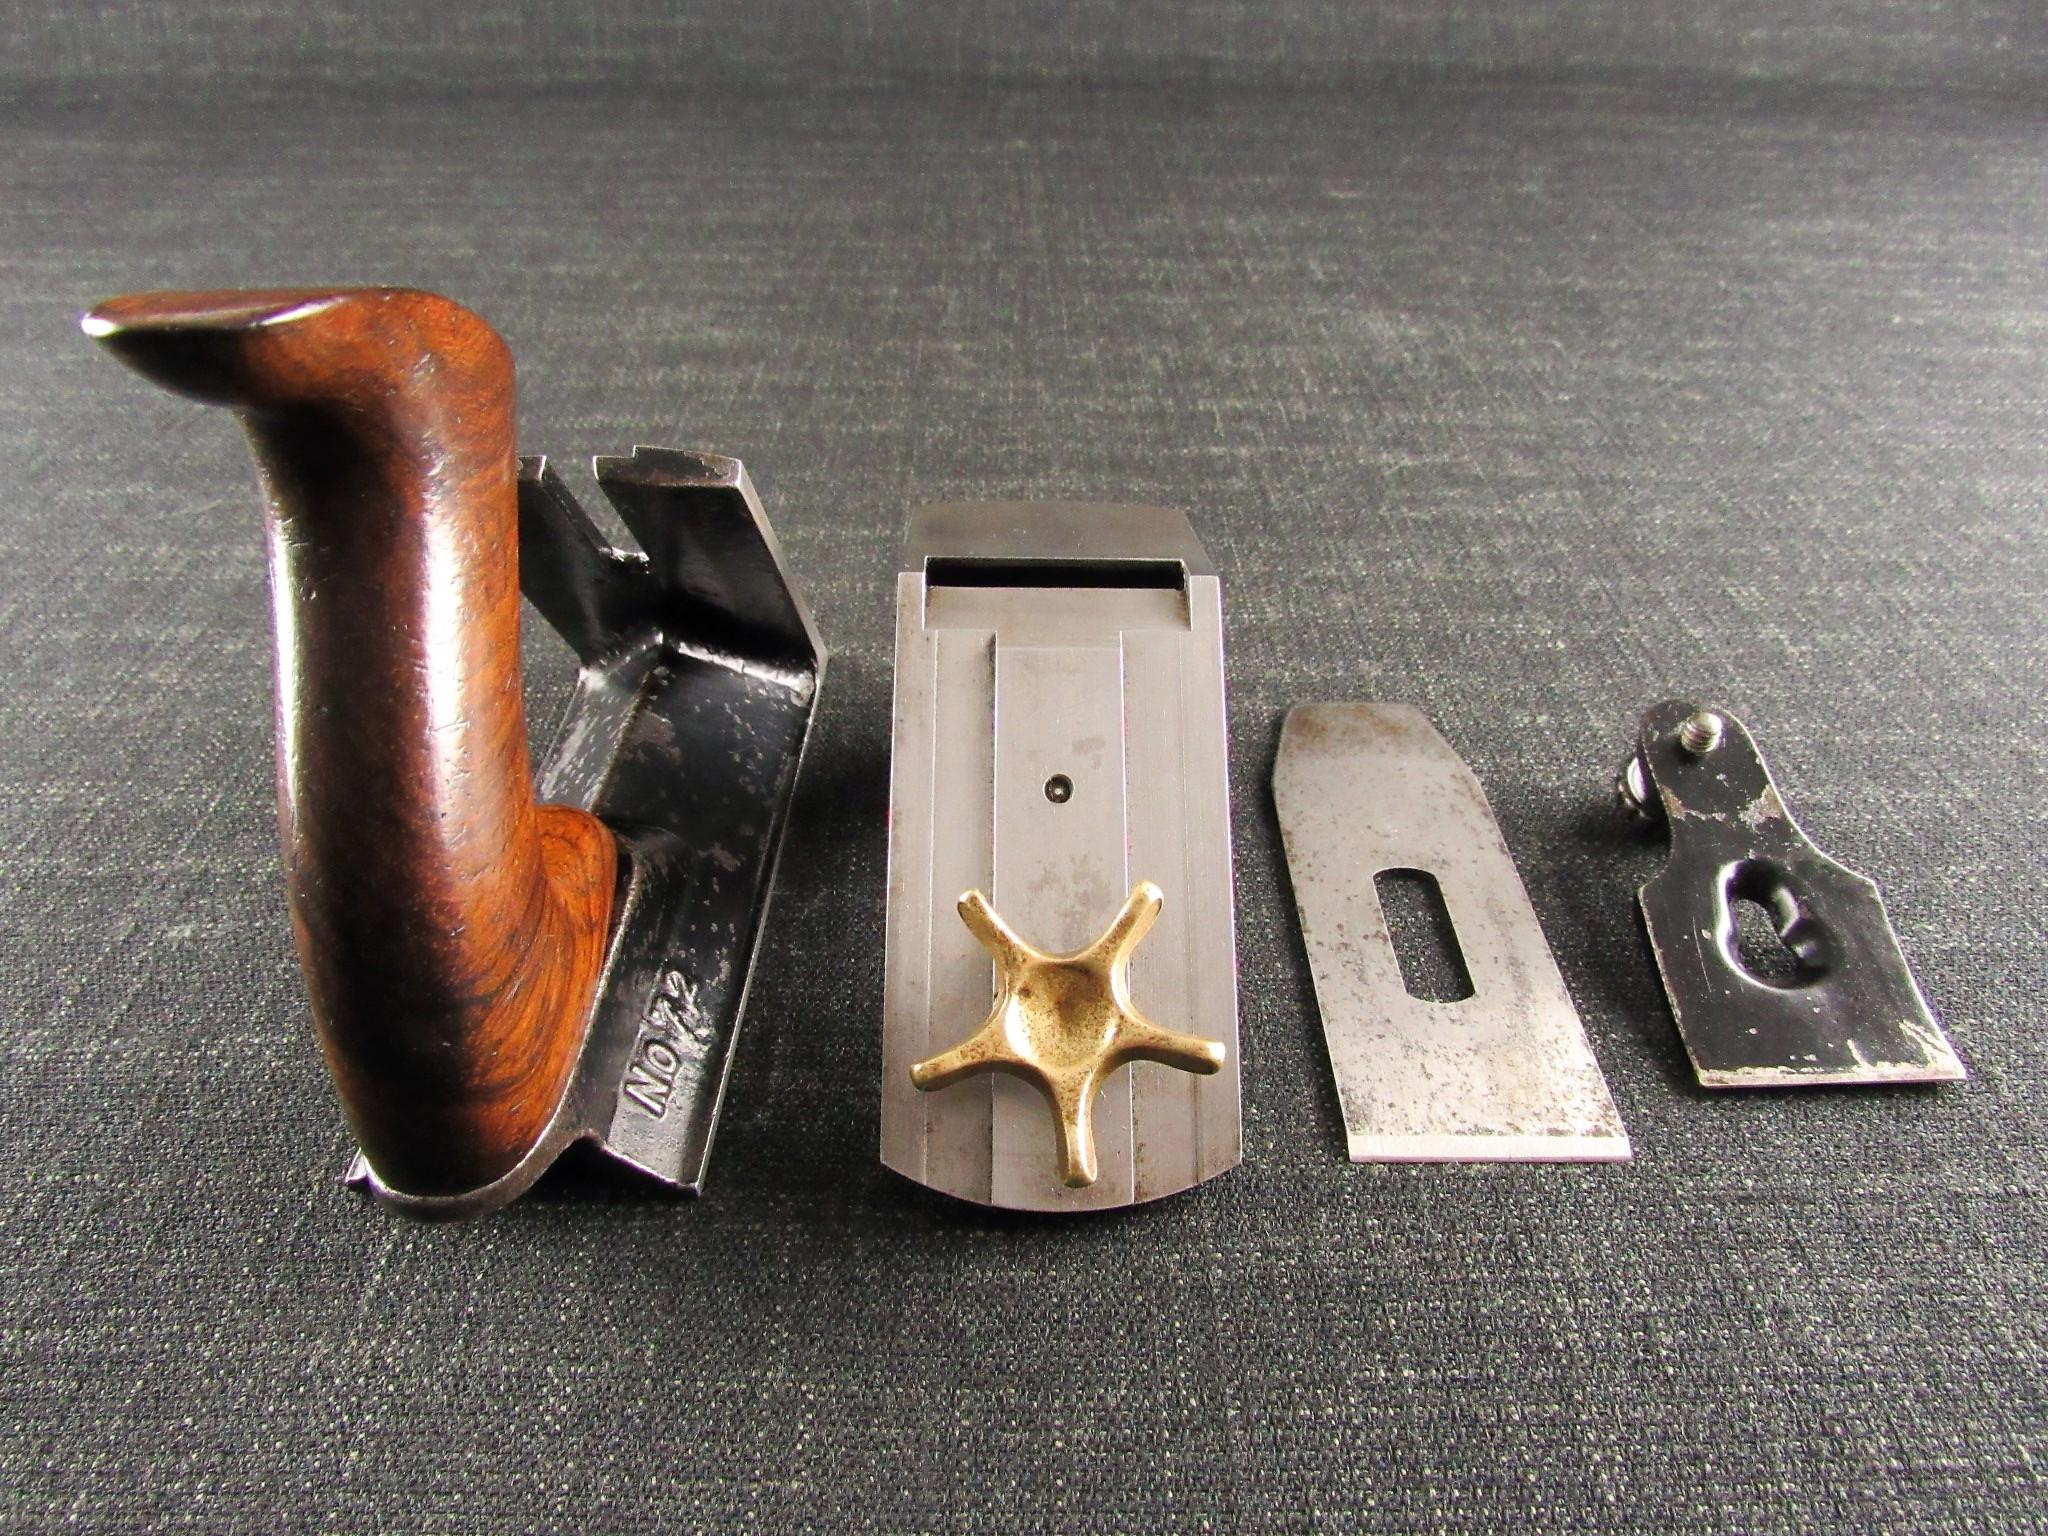 Scarce Early American STANLEY No 72 Chamfer Plane - Type 2